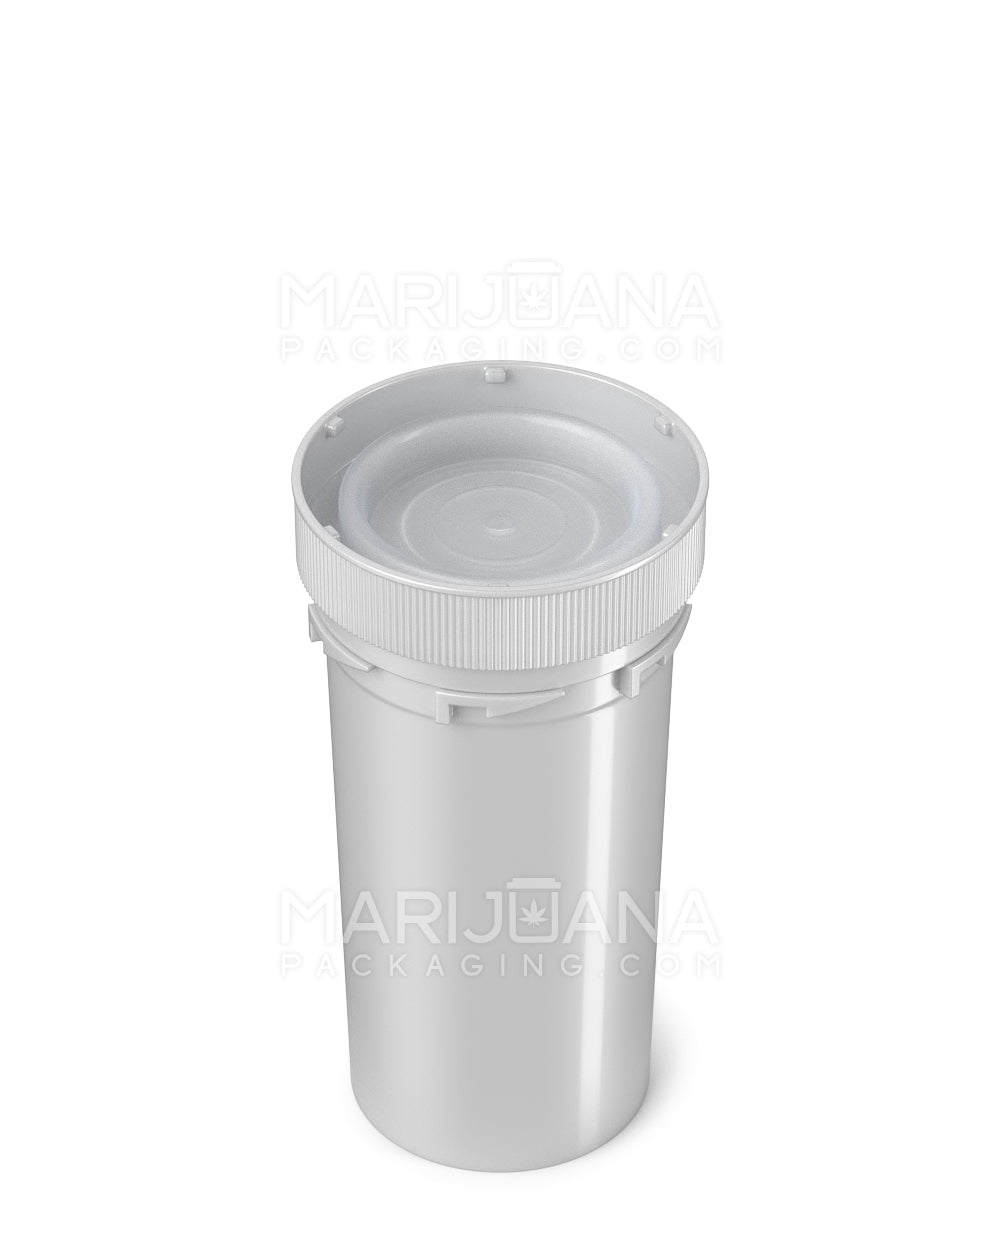 Child Resistant | Opaque Silver Blank Reversible Cap Vials | 40dr - 10g - 150 Count - 5